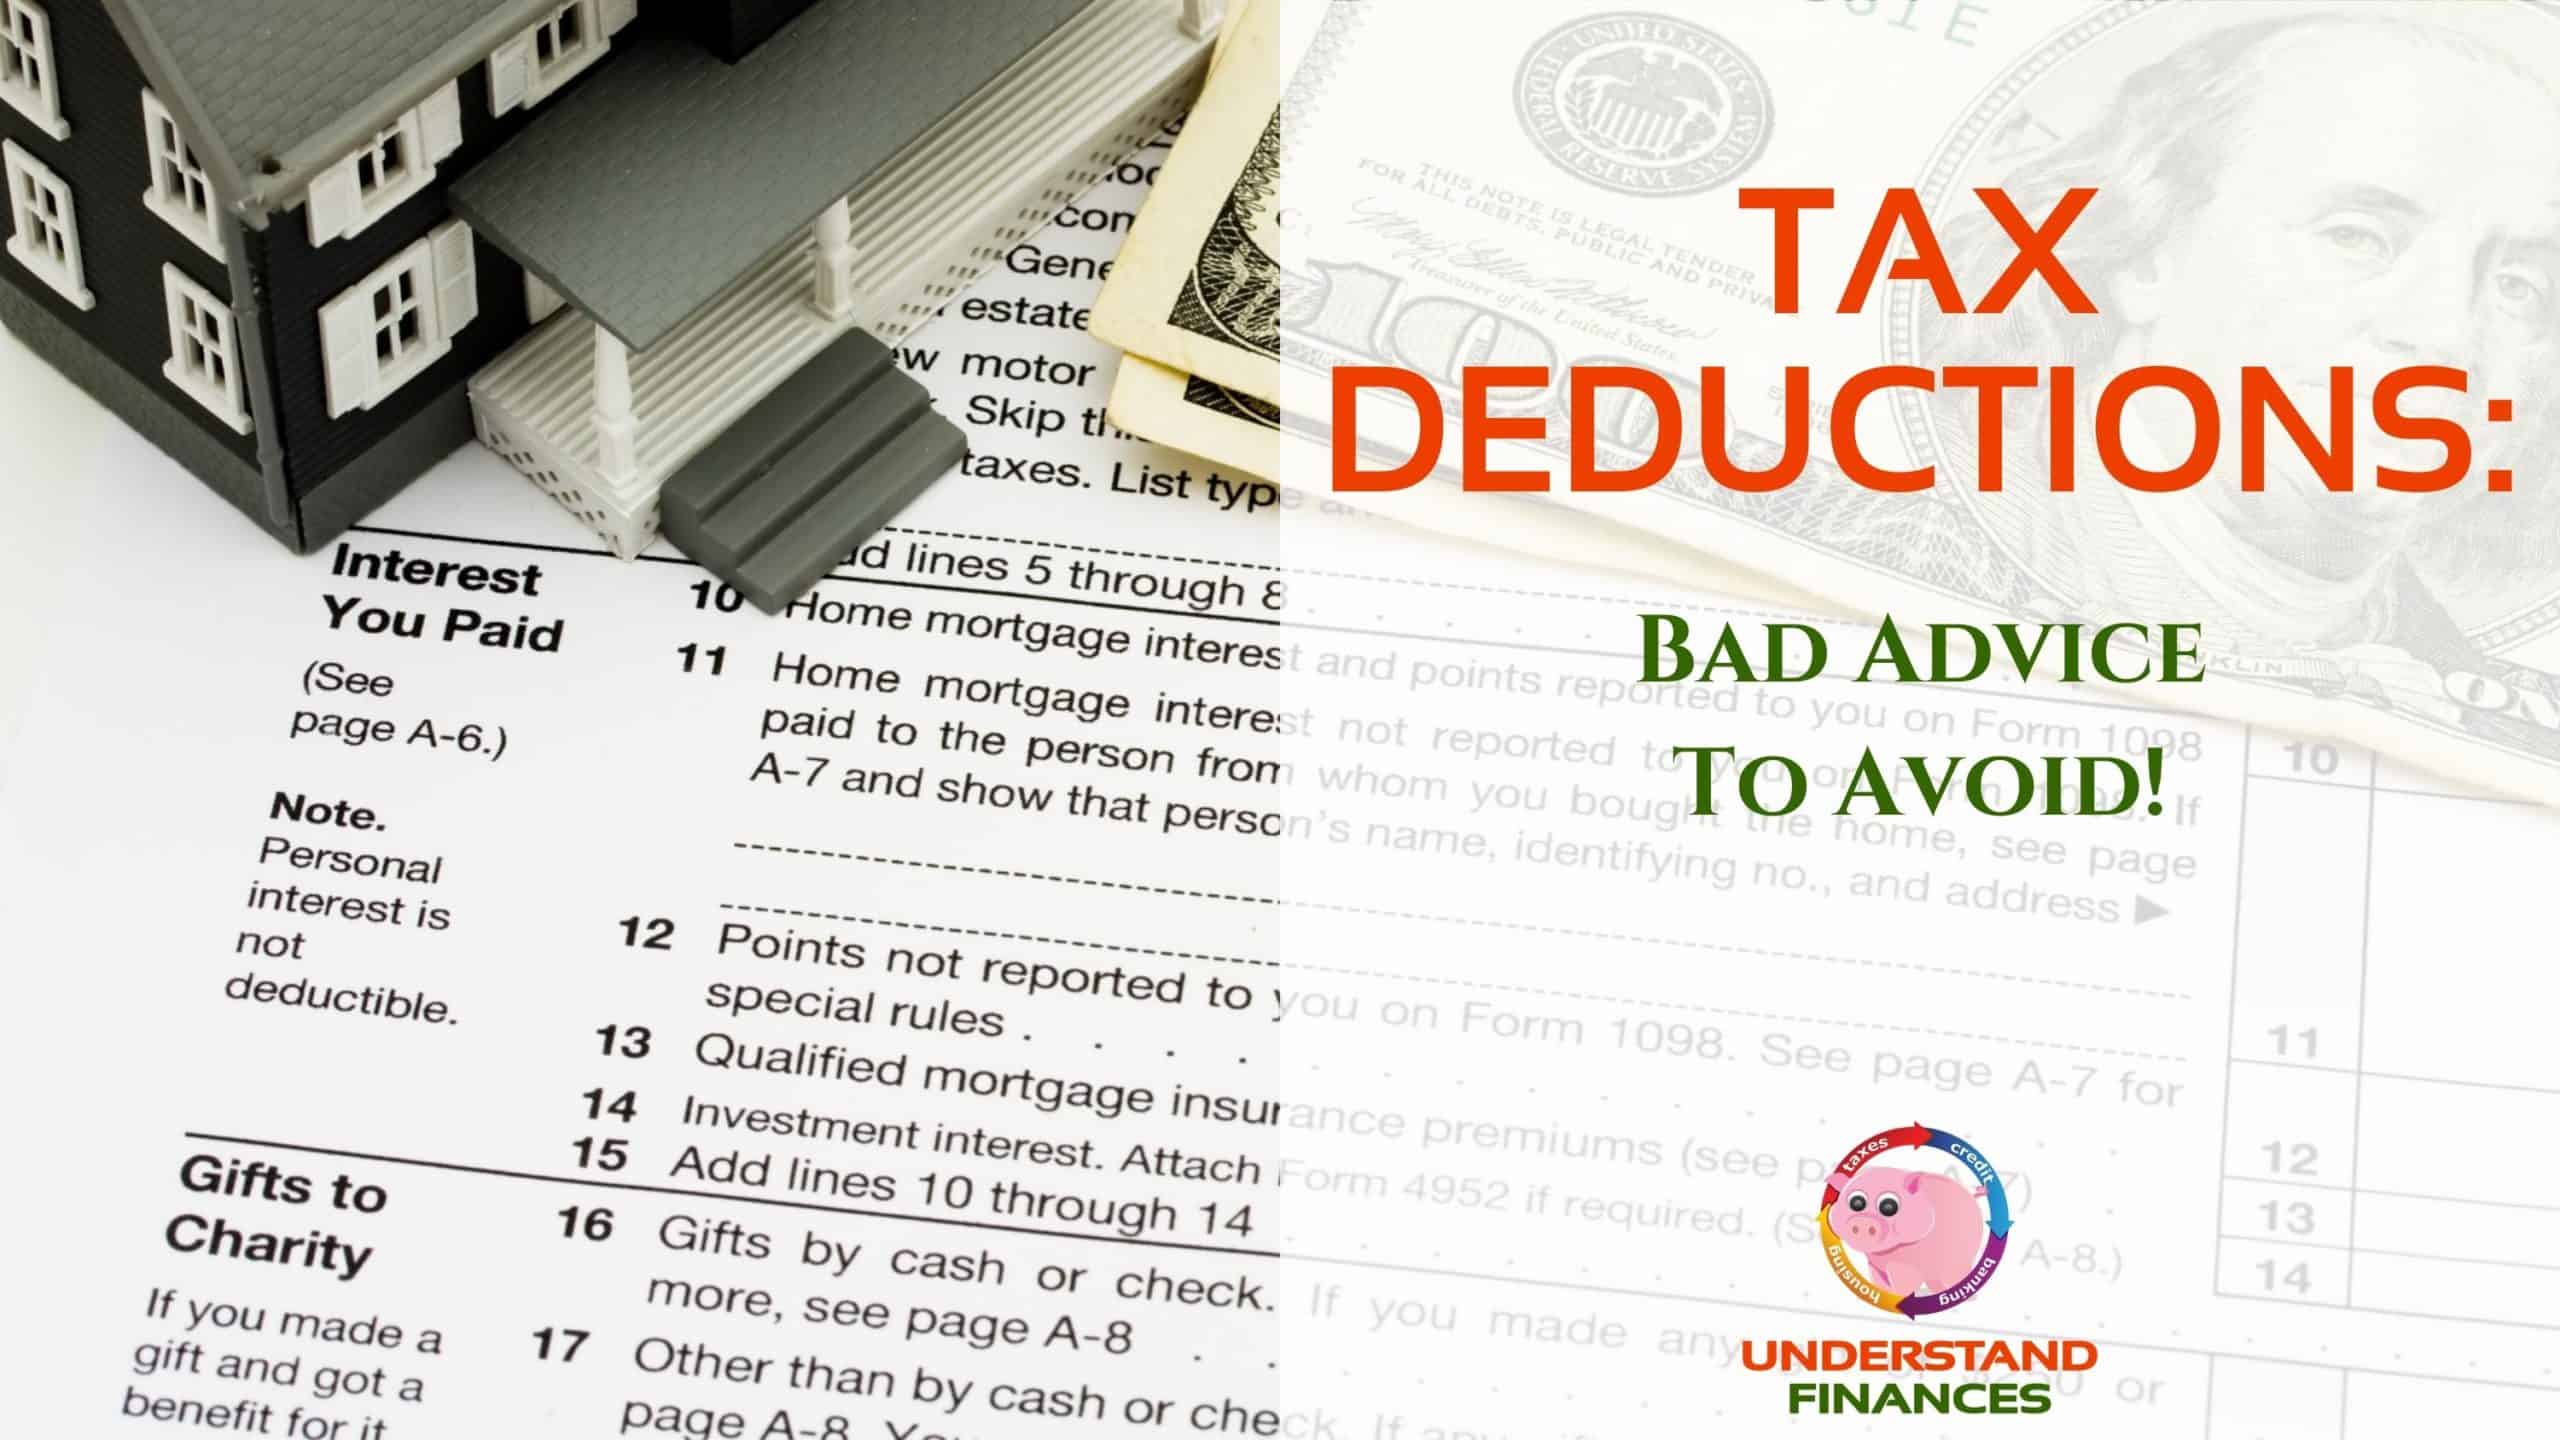 Tax Deductions: Bad Advice To Avoid